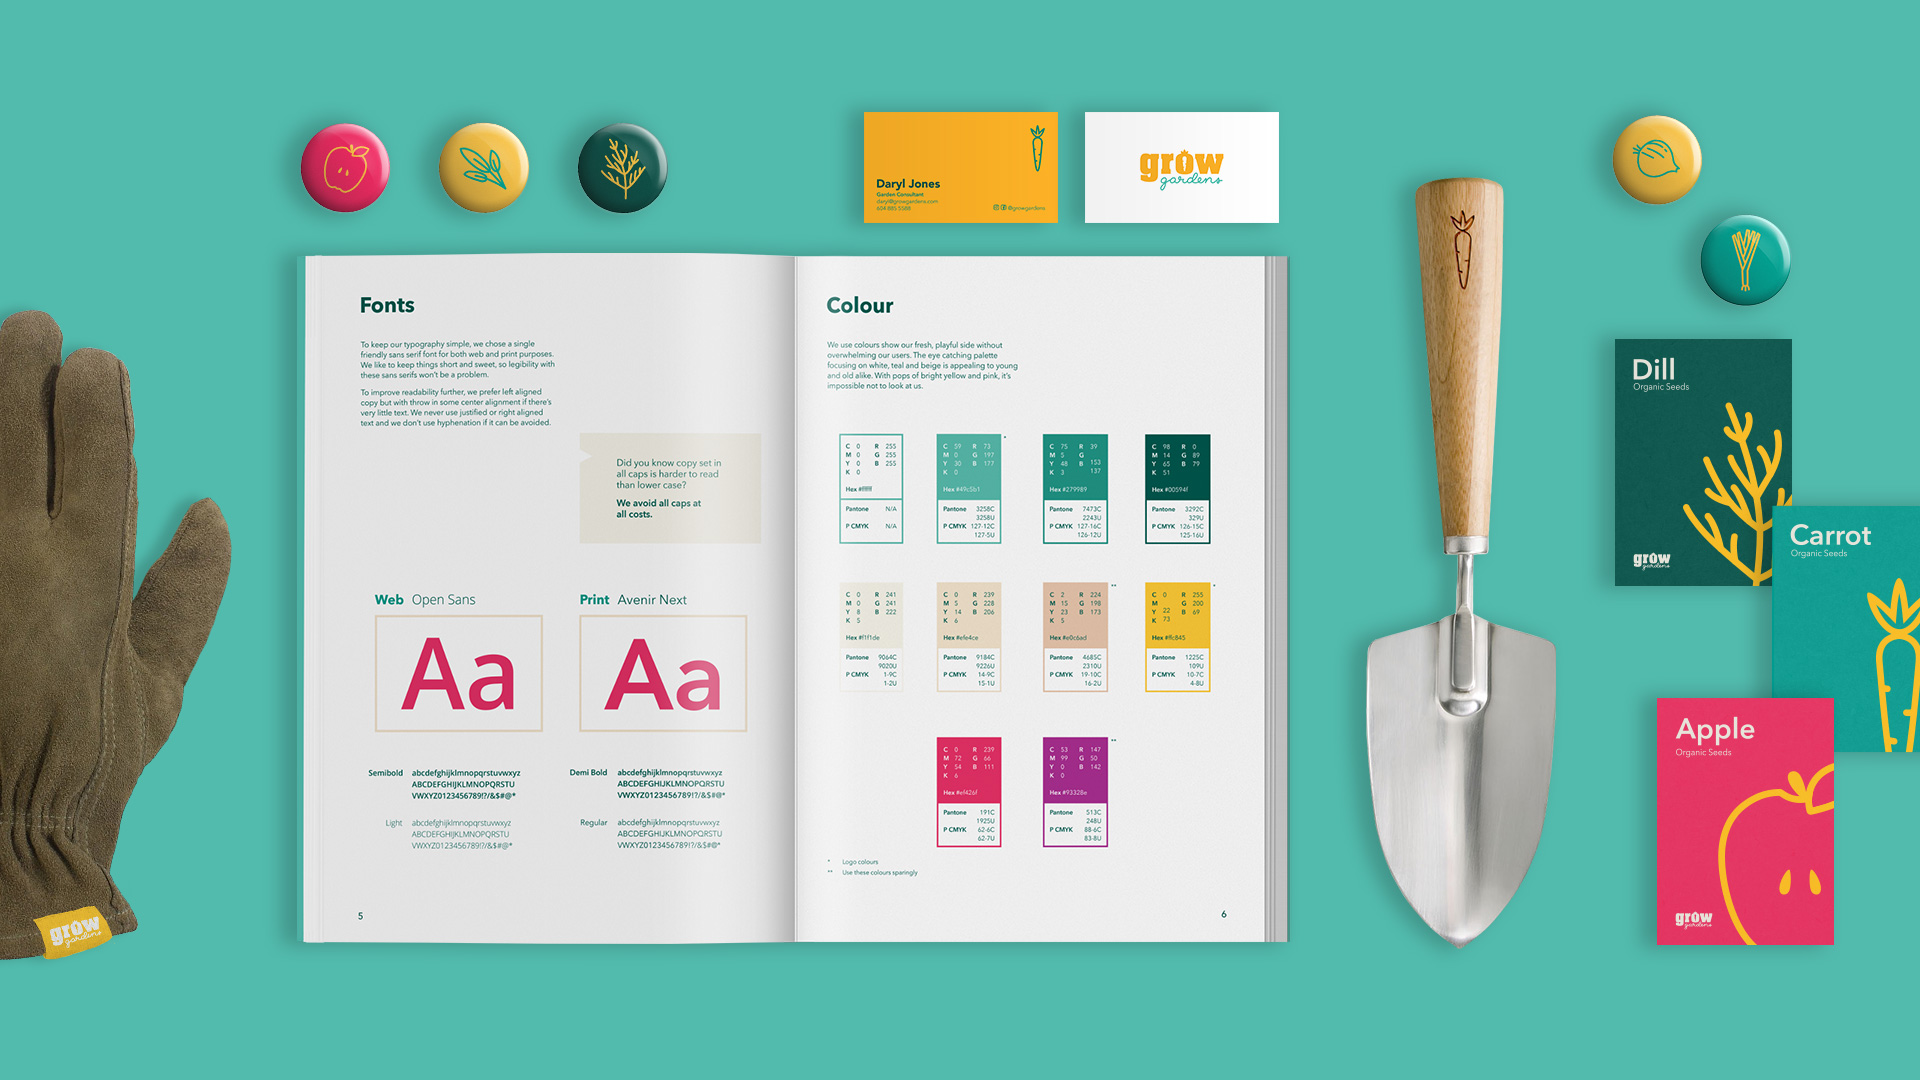 Danielle Vallée | Identity | Friendly brand guide and collateral for Grow Gardens, an accessible gardening service